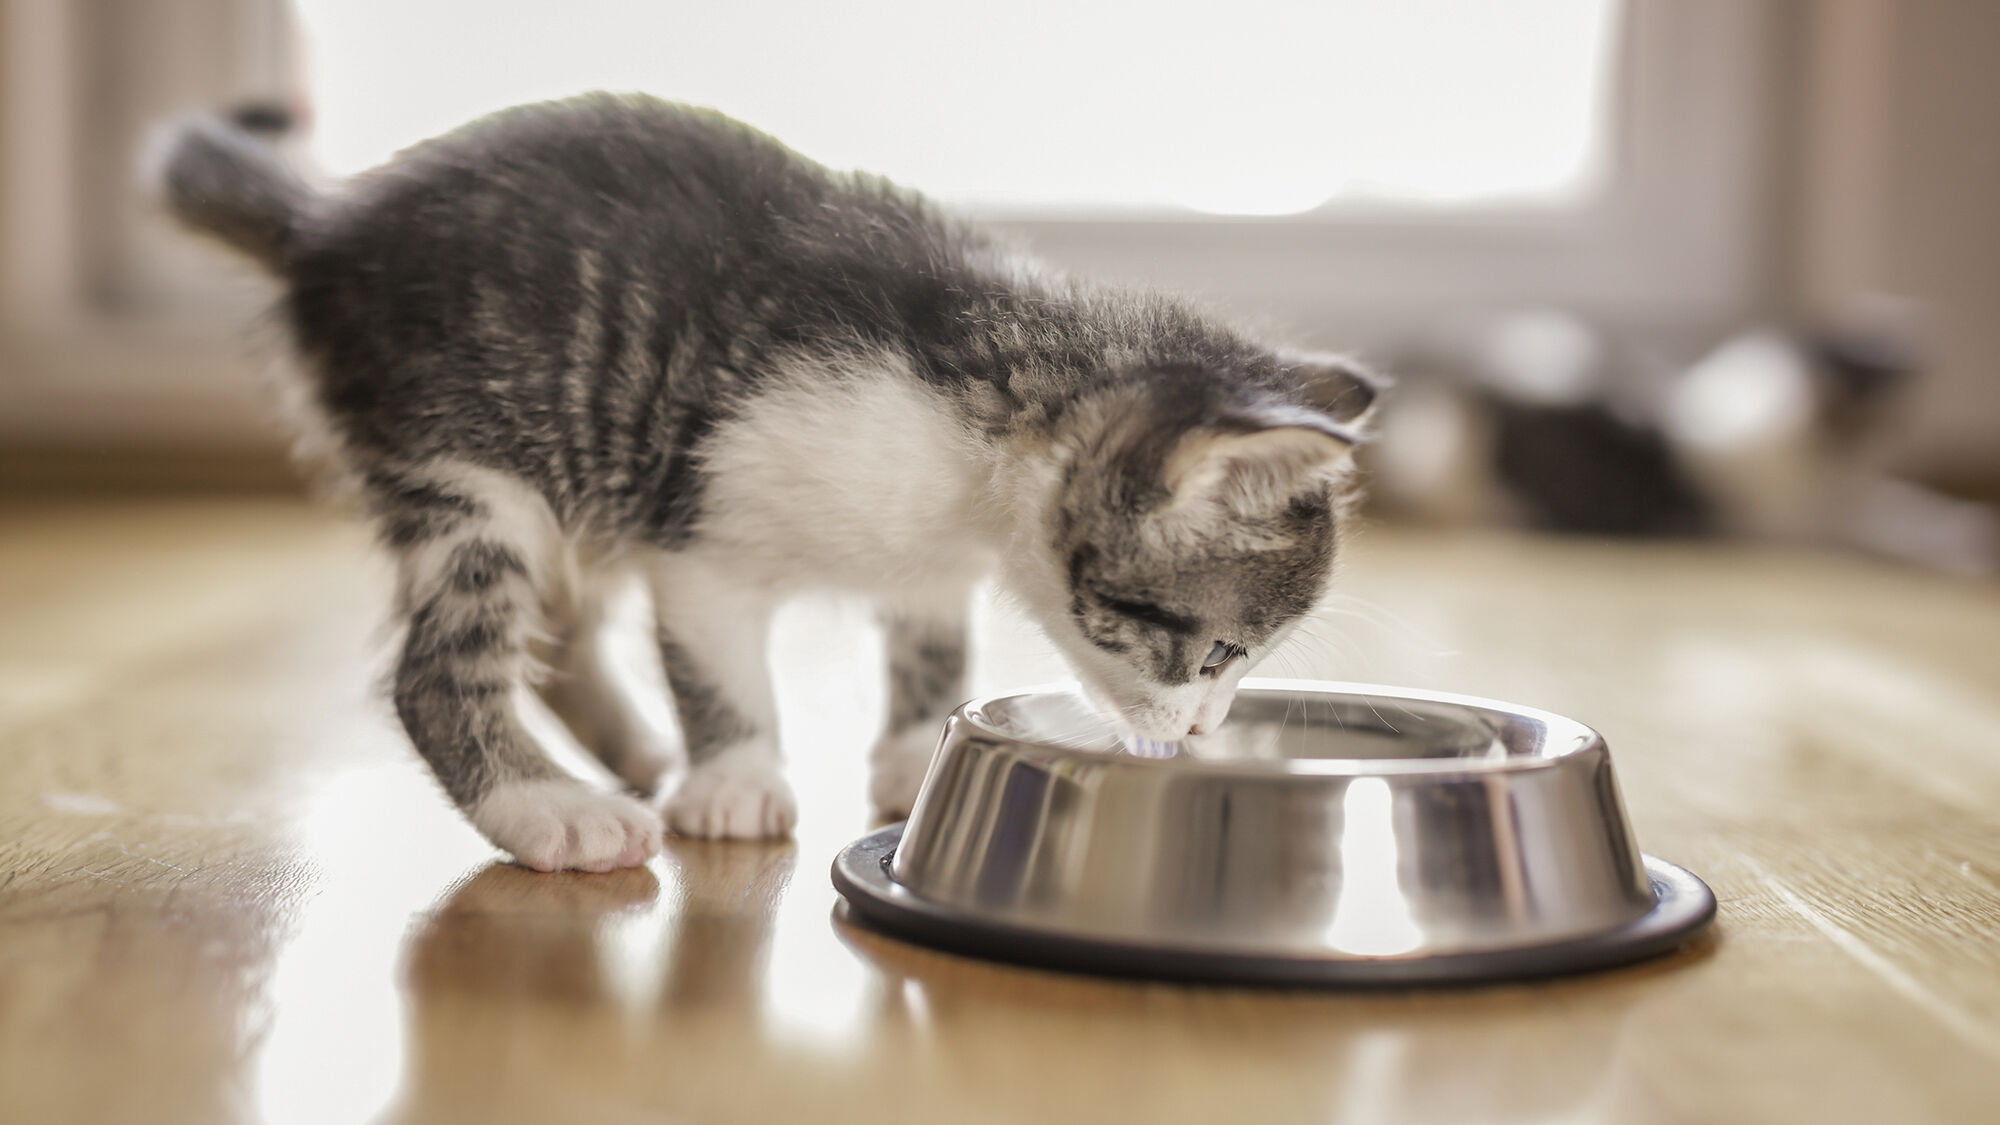 Small grey and white kitten eating from a stainless steel bowl indoors